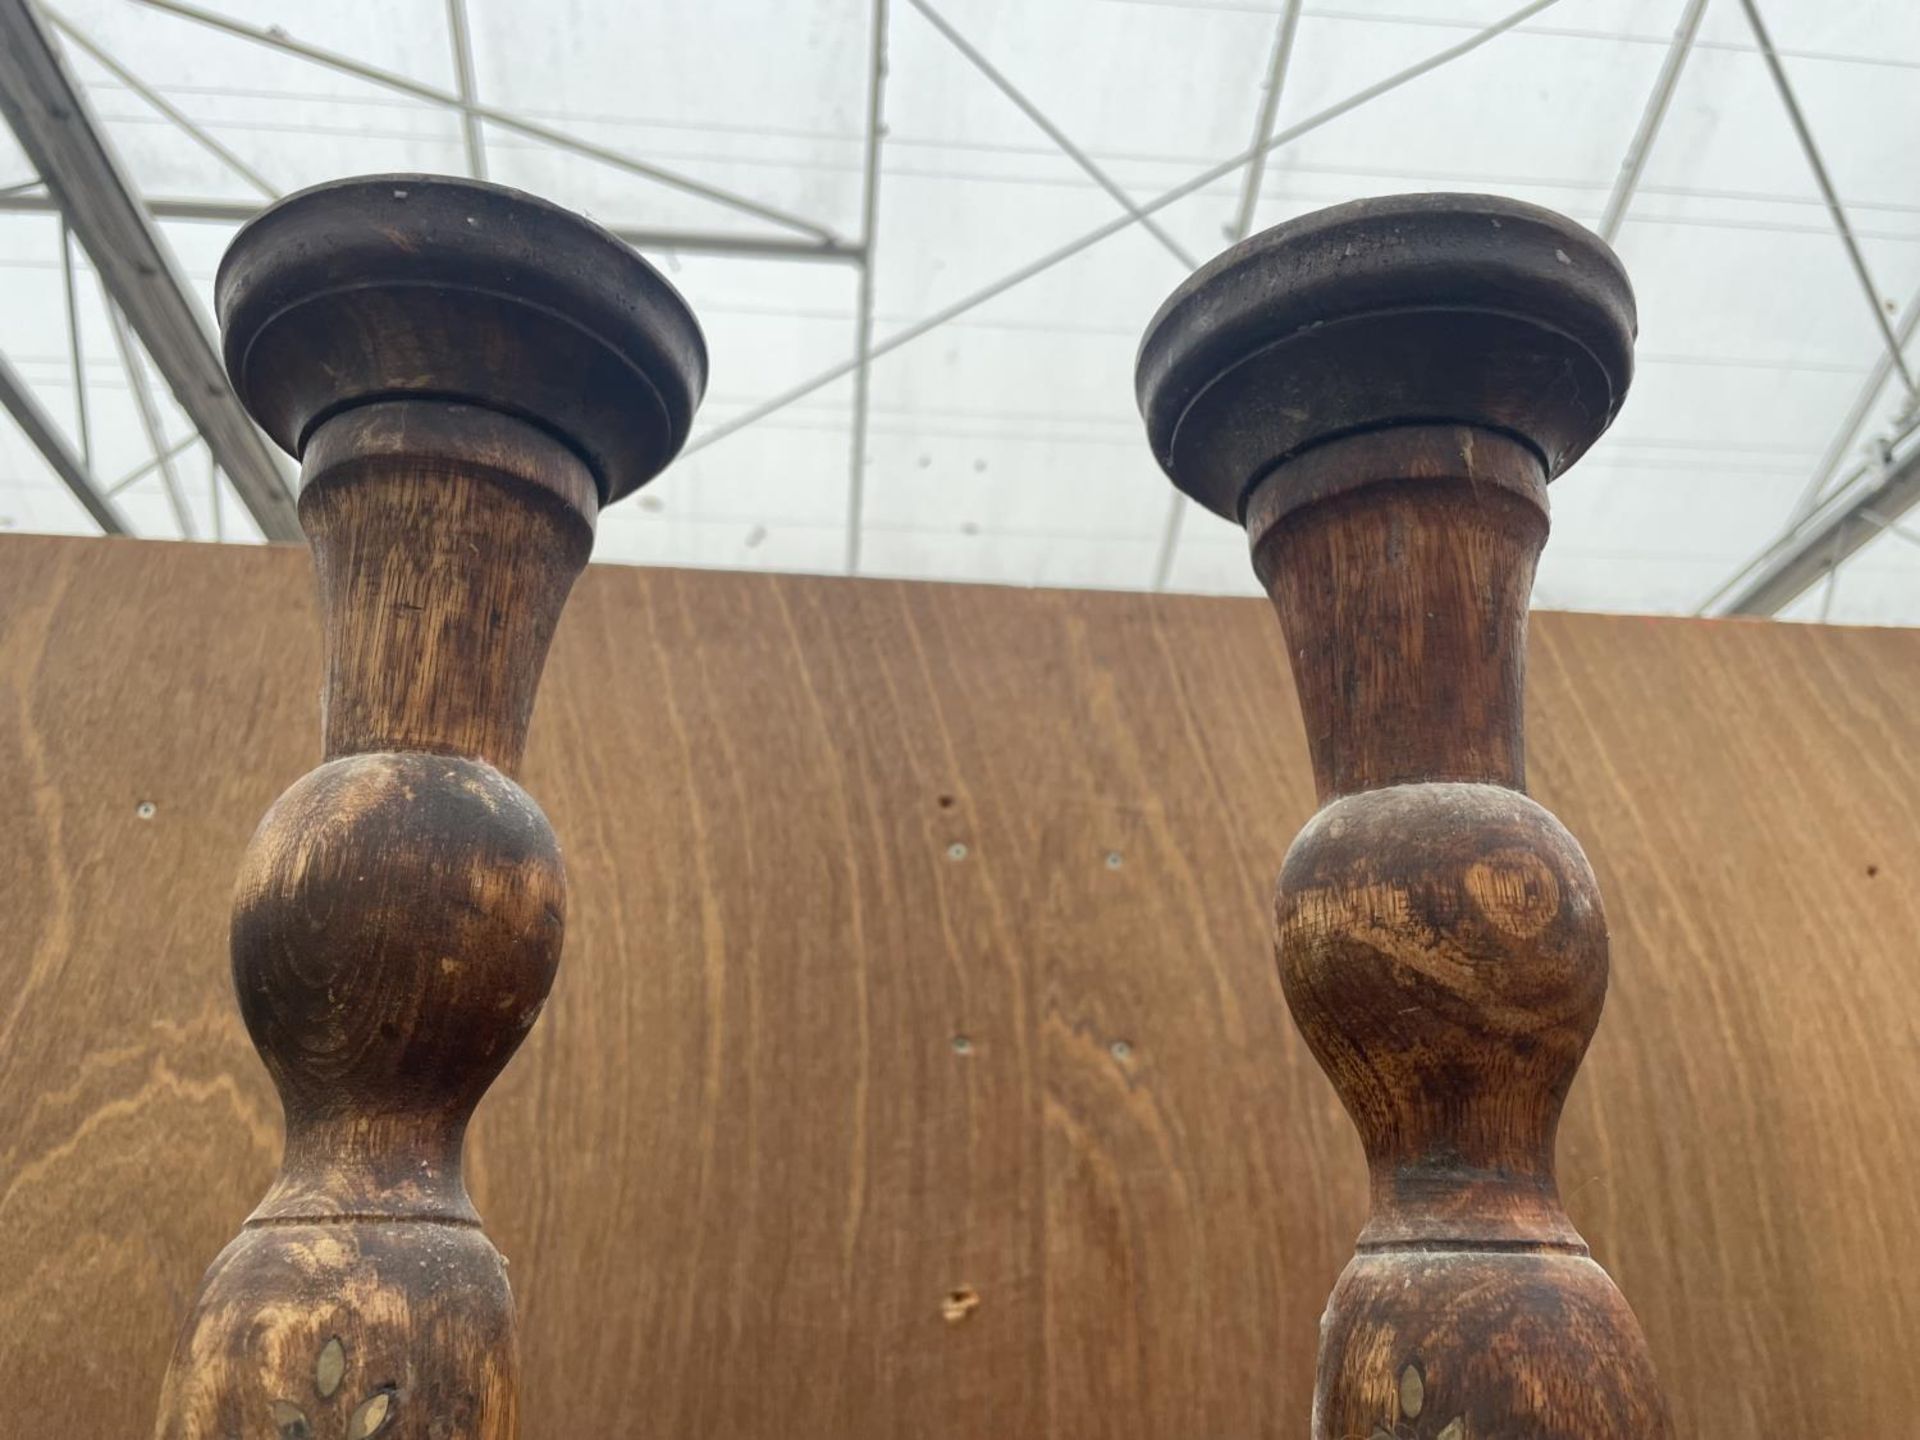 A PAIR OF CARVED WOODEN CANDLESTICKS WITH INSET FLORAL DESIGN - Image 3 of 3